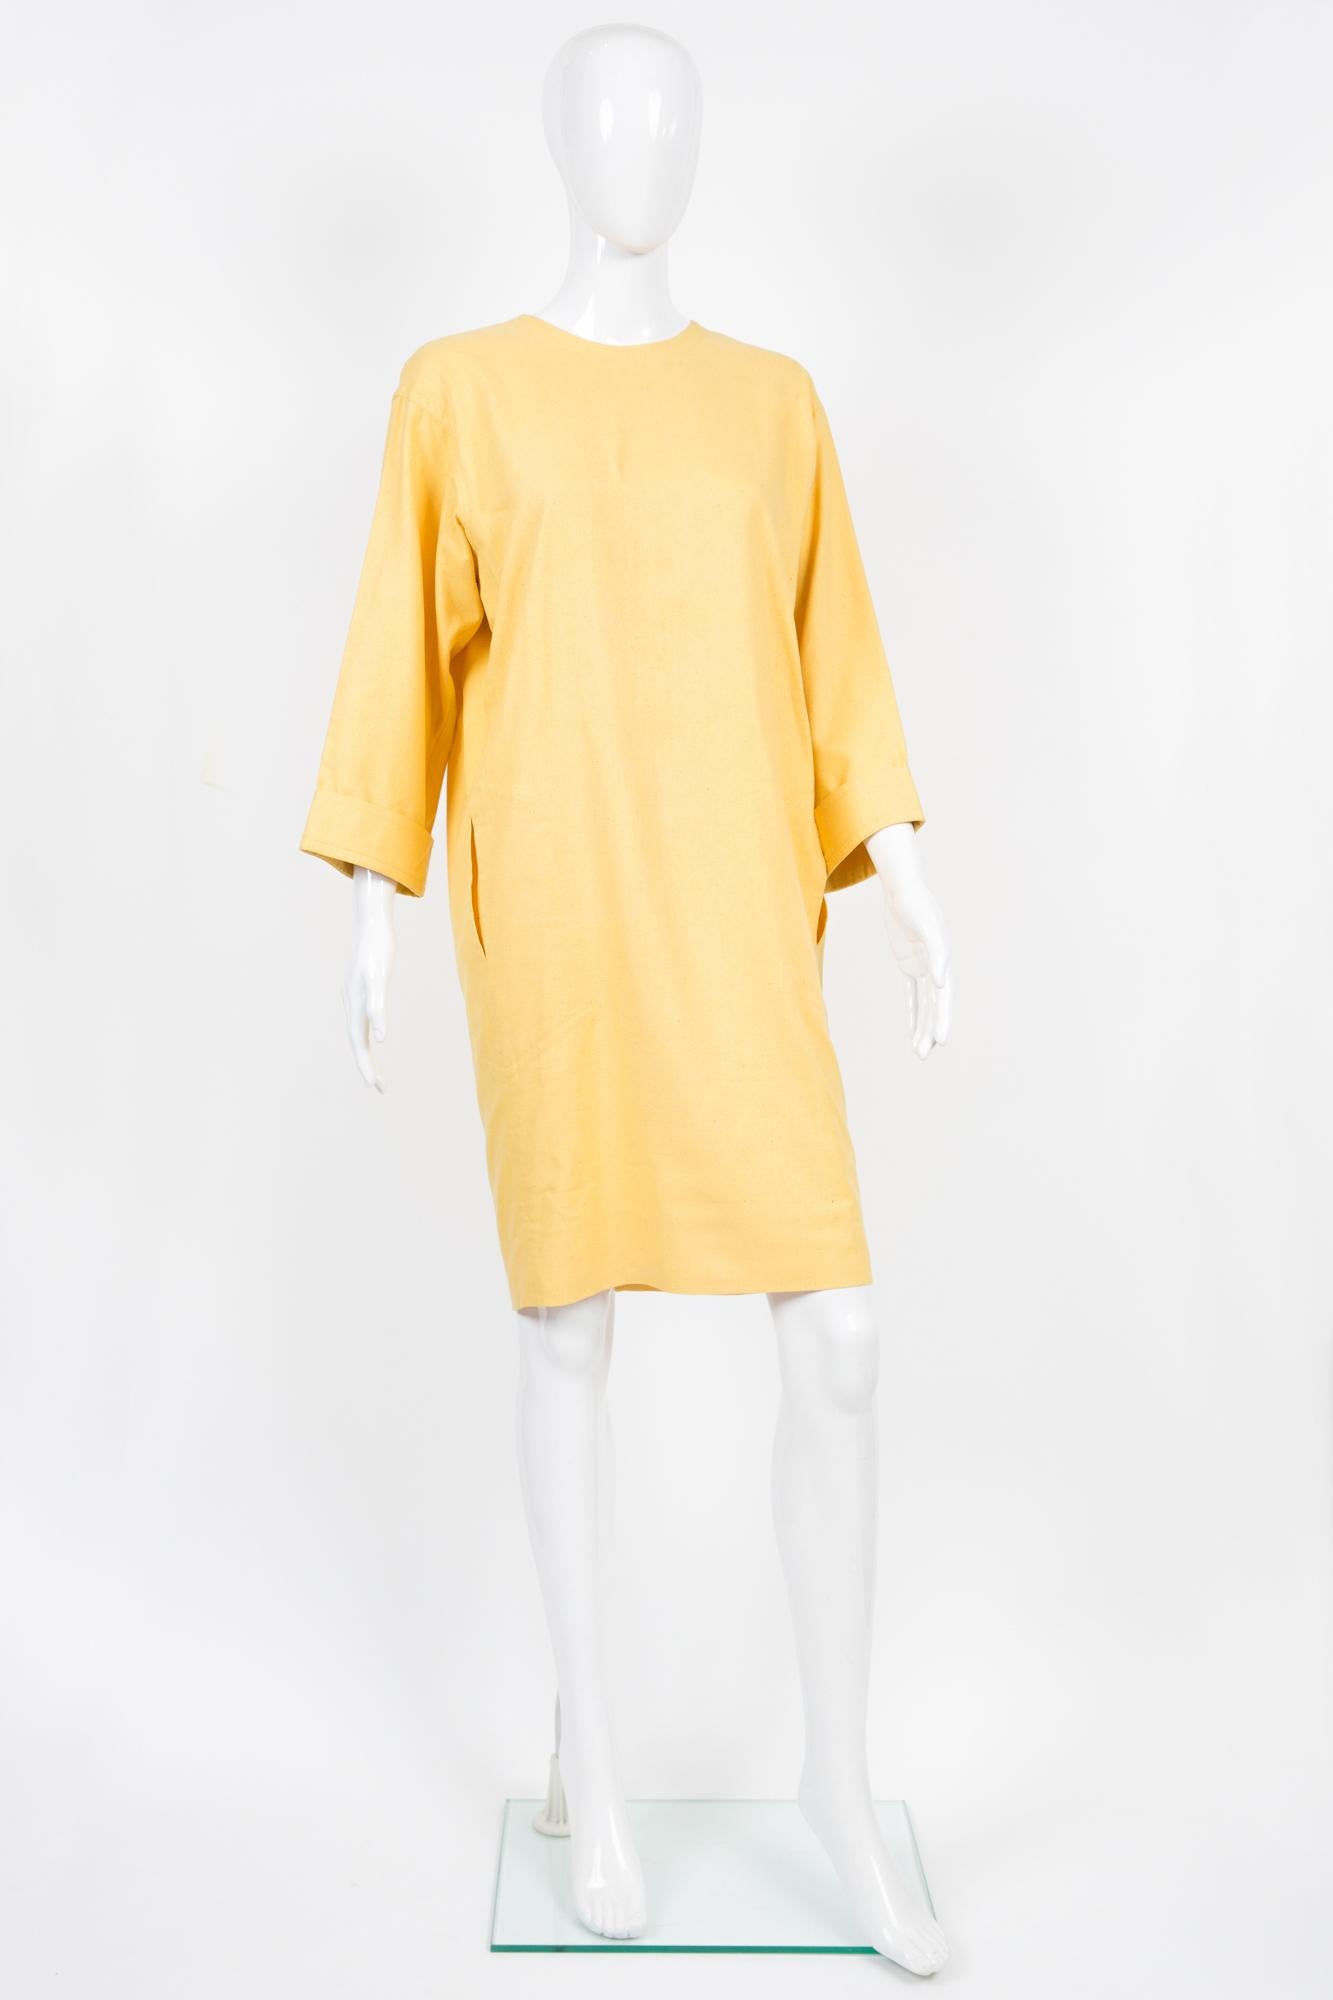 1990s Yves Saint Laurent yellow silk dress featuring 3/4 sleeves, sides seams pockets, an oversized volume. 
100% silk
In excellent vintage condition. Made in France. 
Estimated size 36fr/ US4/ UK8
We guarantee you will receive this gorgeous item as